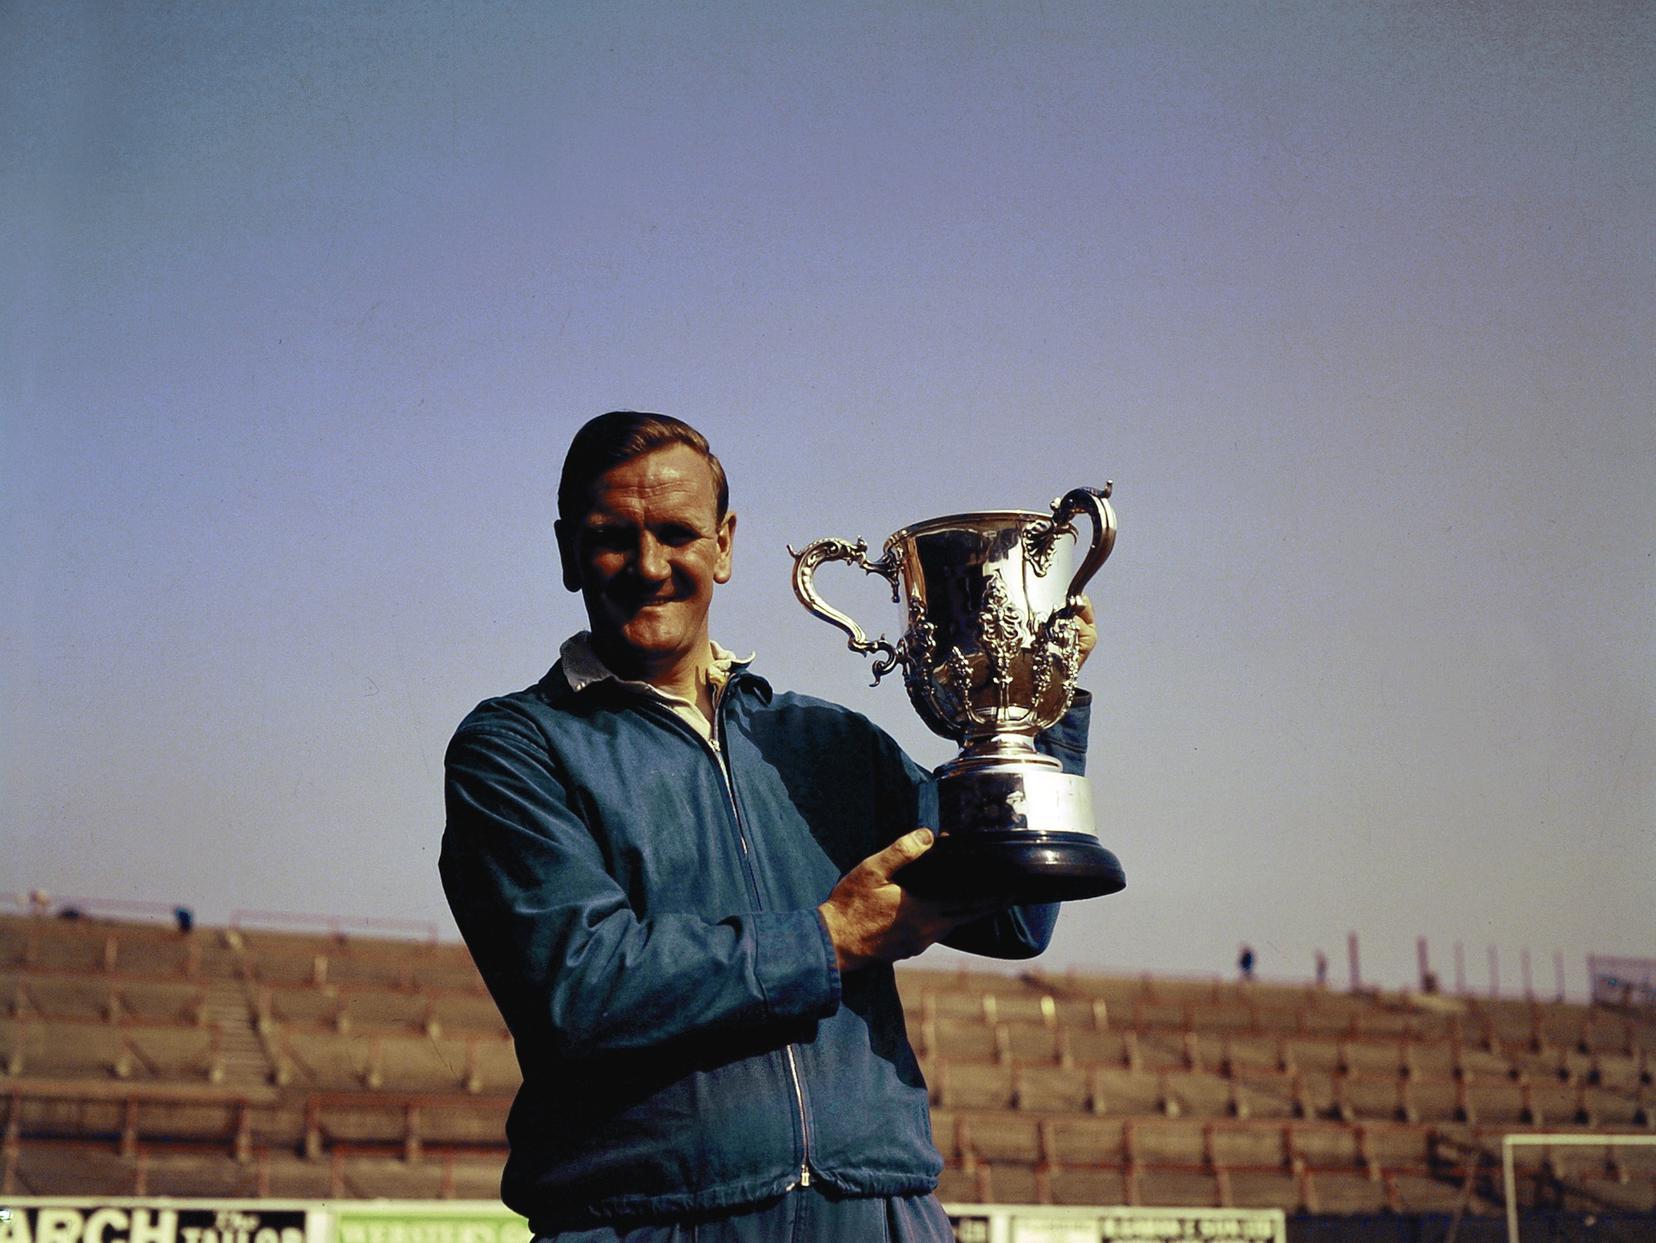 Don Revie holding the League Cup - his first major trophy as Leeds manager.